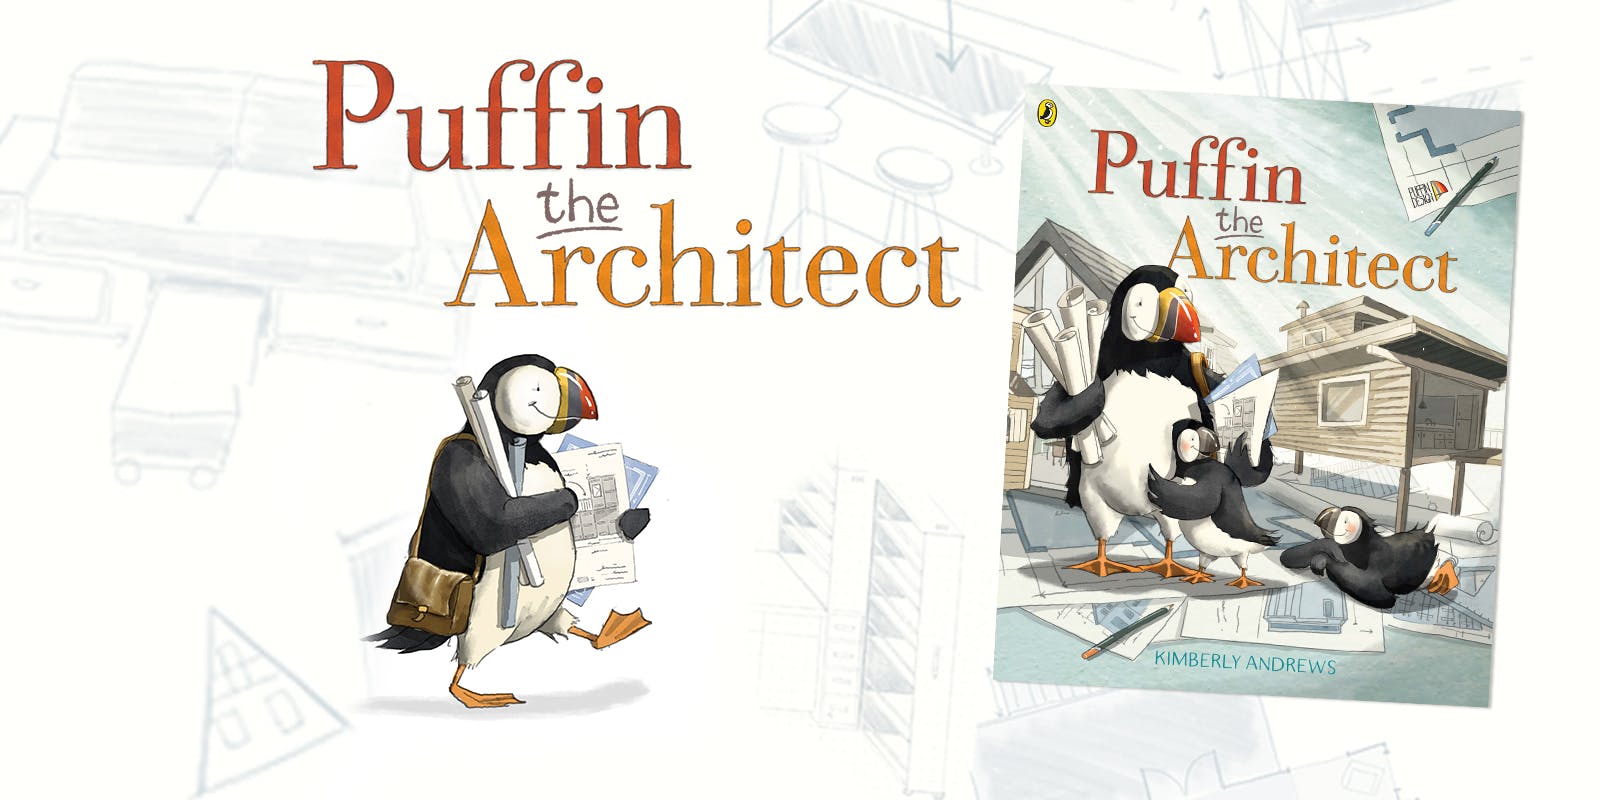 Puffin the Architect: build Moose's treehouse